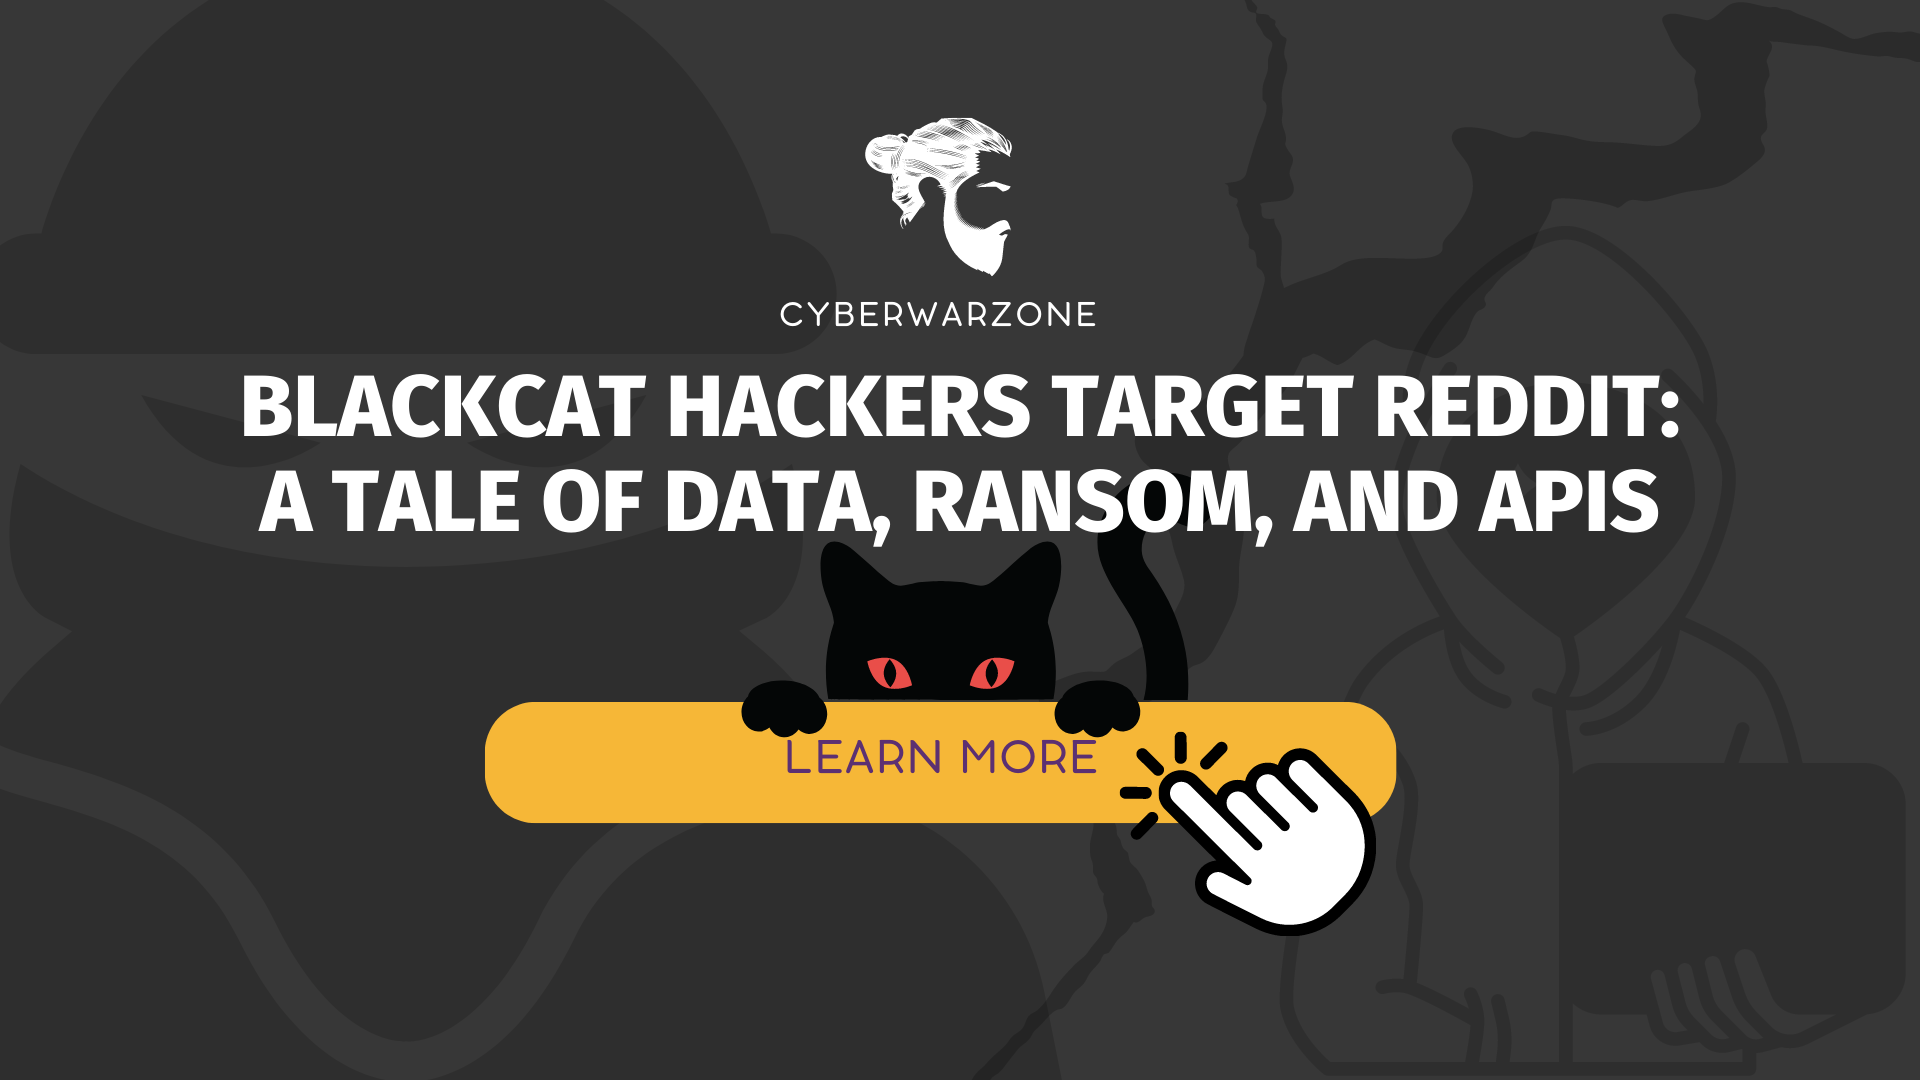 BlackCat Hackers Target Reddit: A Tale of Data, Ransom, and APIs